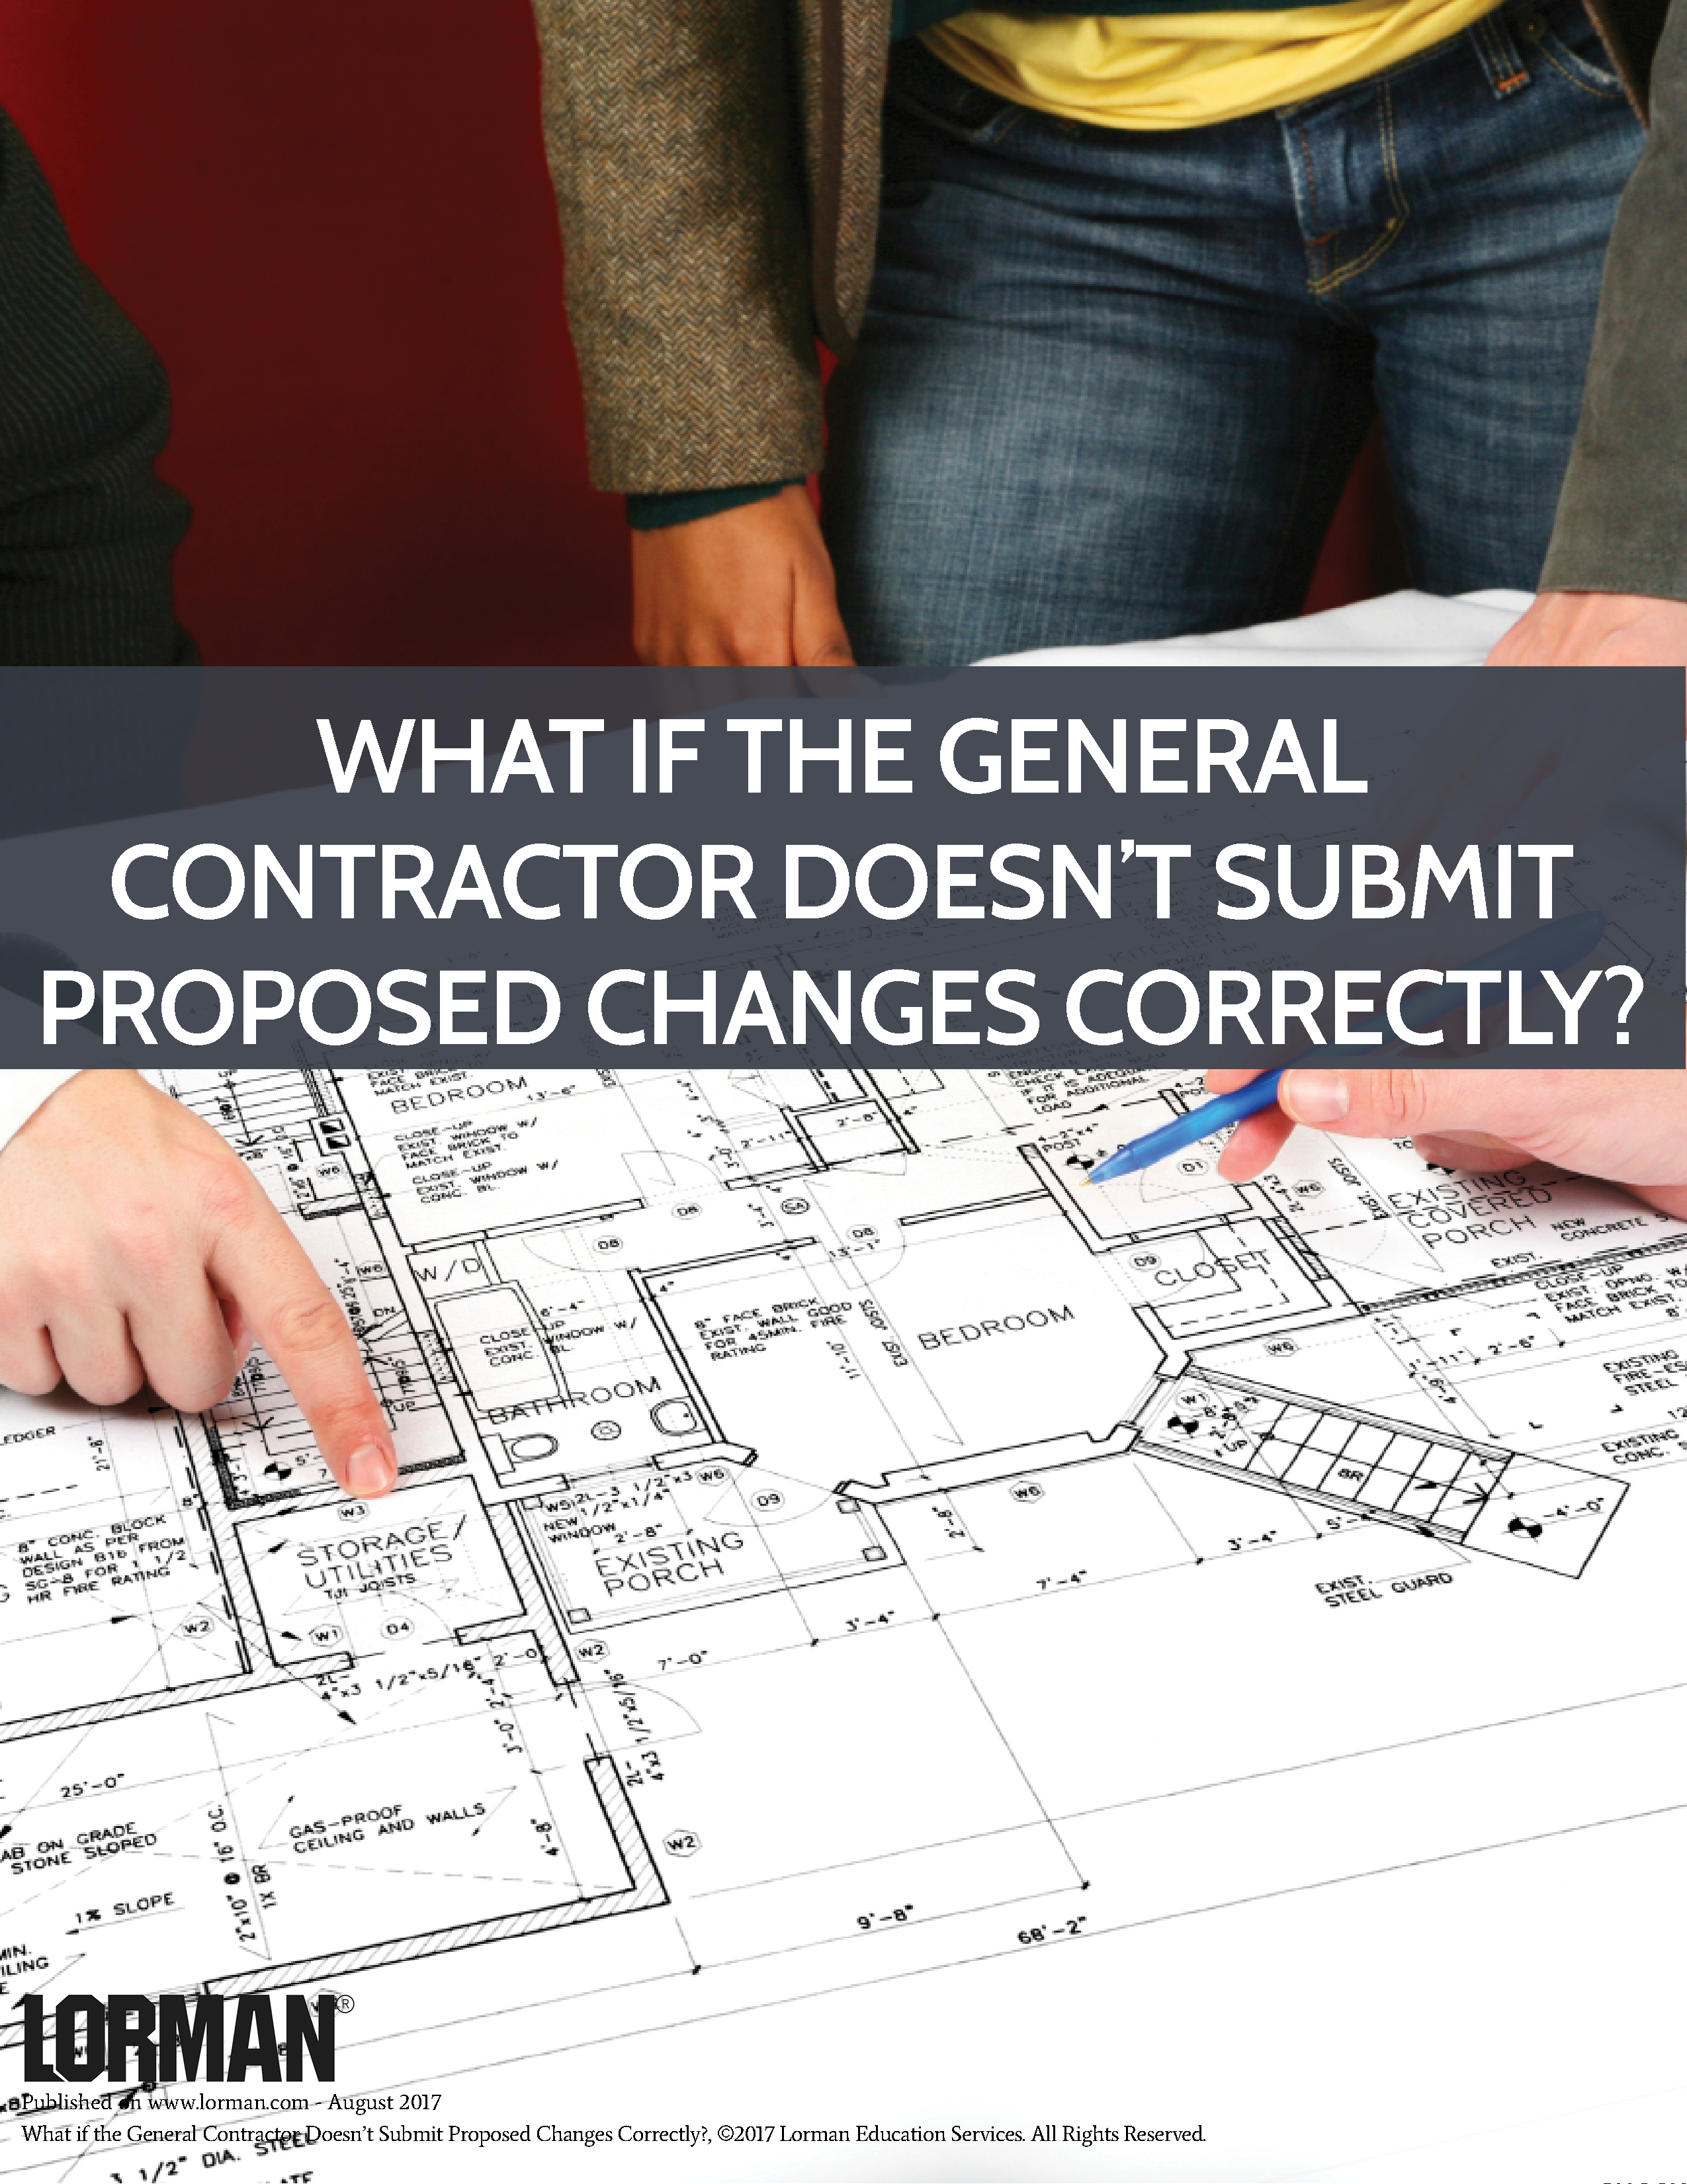 What if the General Contractor Doesn’t Submit Proposed Changes Correctly?